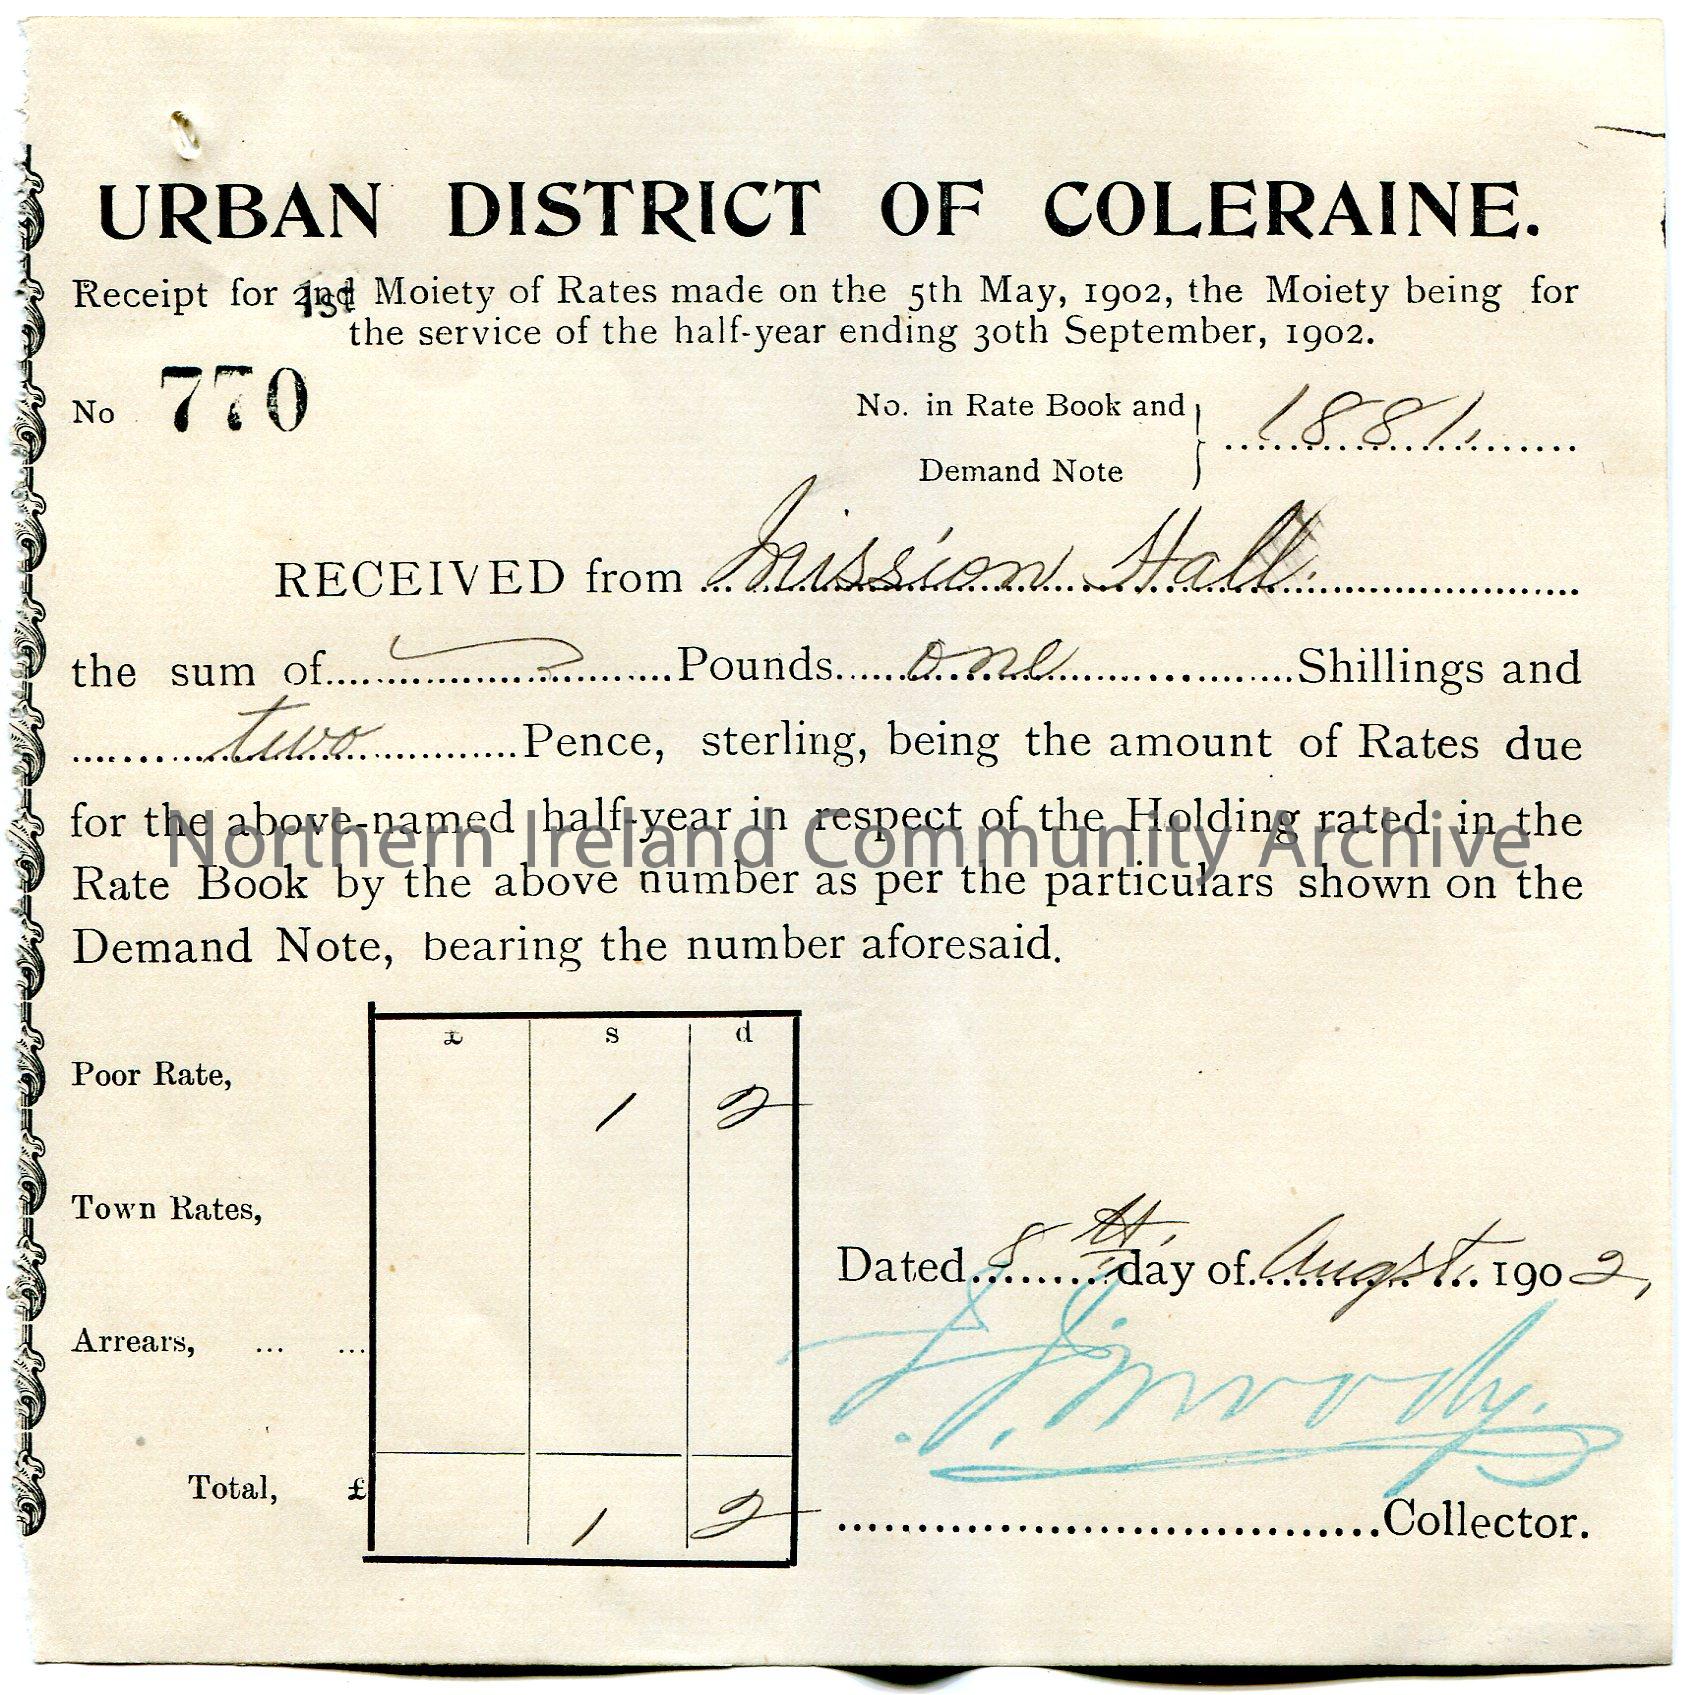 Printed and handwritten receipt for half year rates ending 30th September, 1902 for a property. Receipt no. 770. Issued by Urban District of Coleraine…